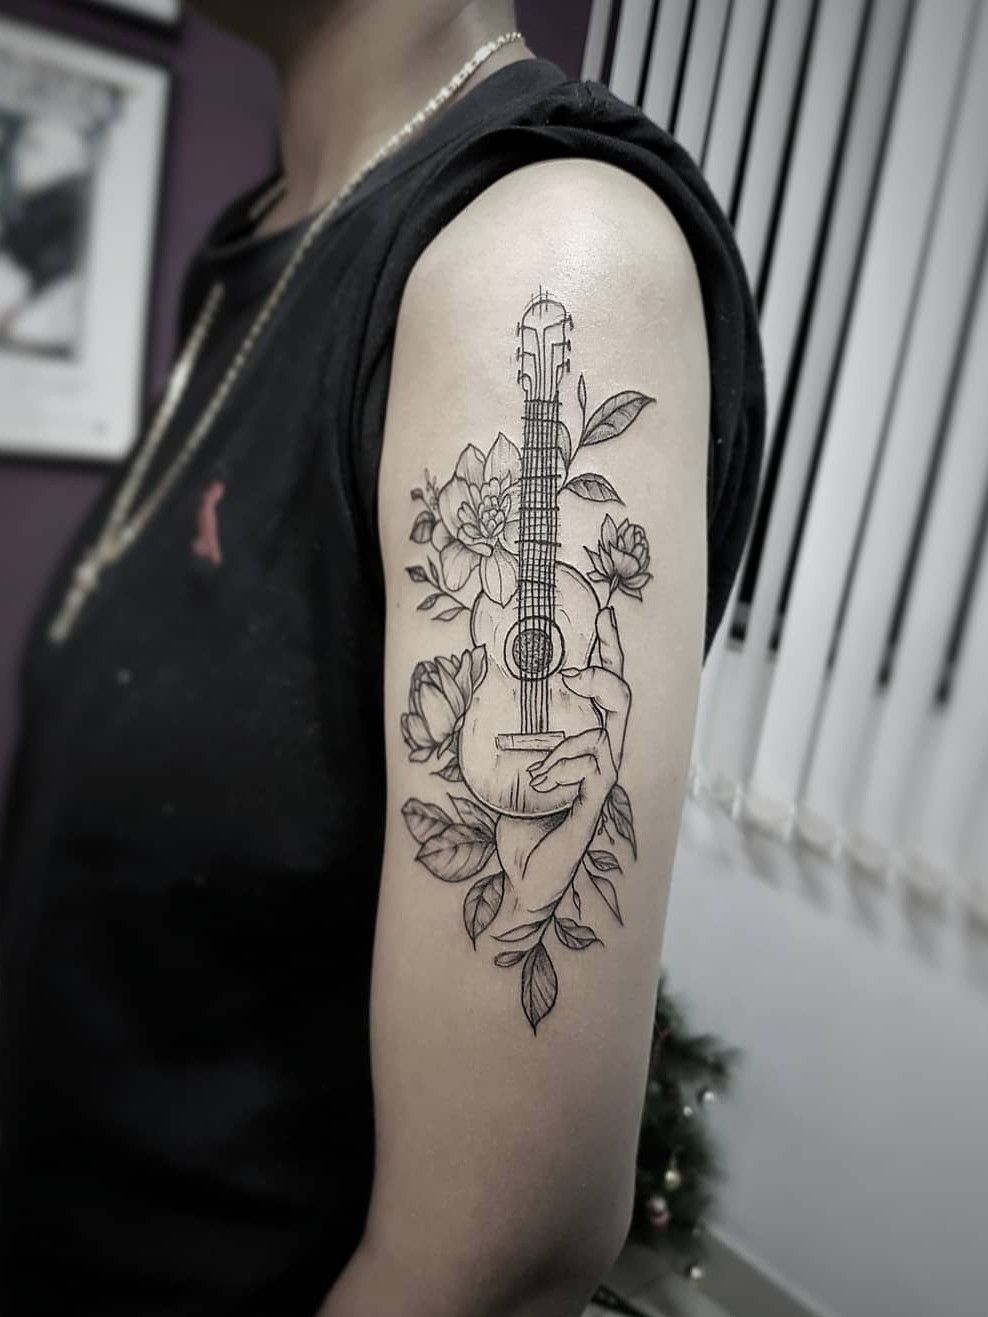 The Meaning of the tattoo Guitar history facts photo drawings sketches